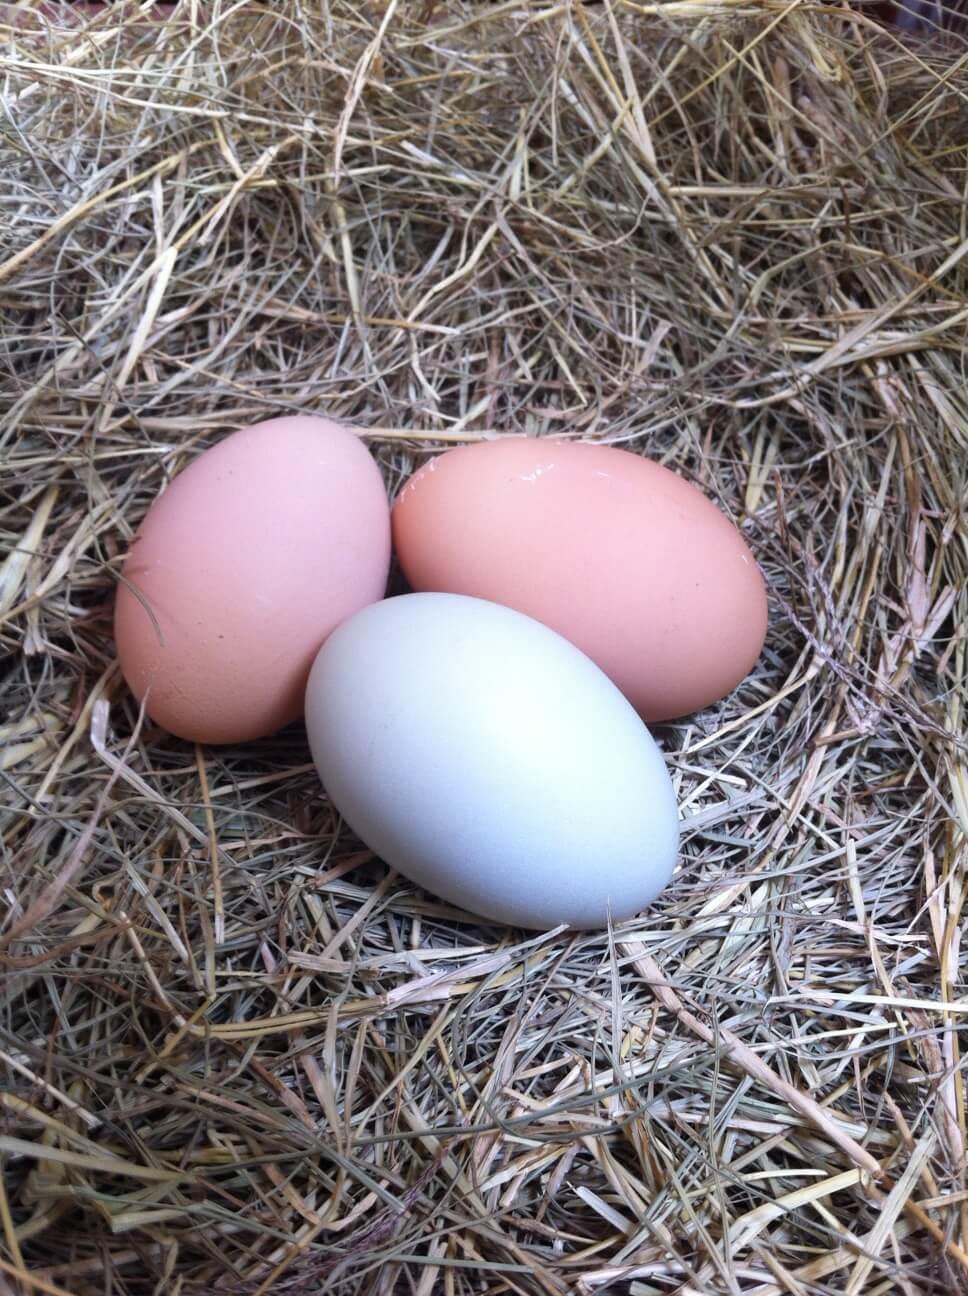 Eggs are great for gardening and adding nutrients to the soil.